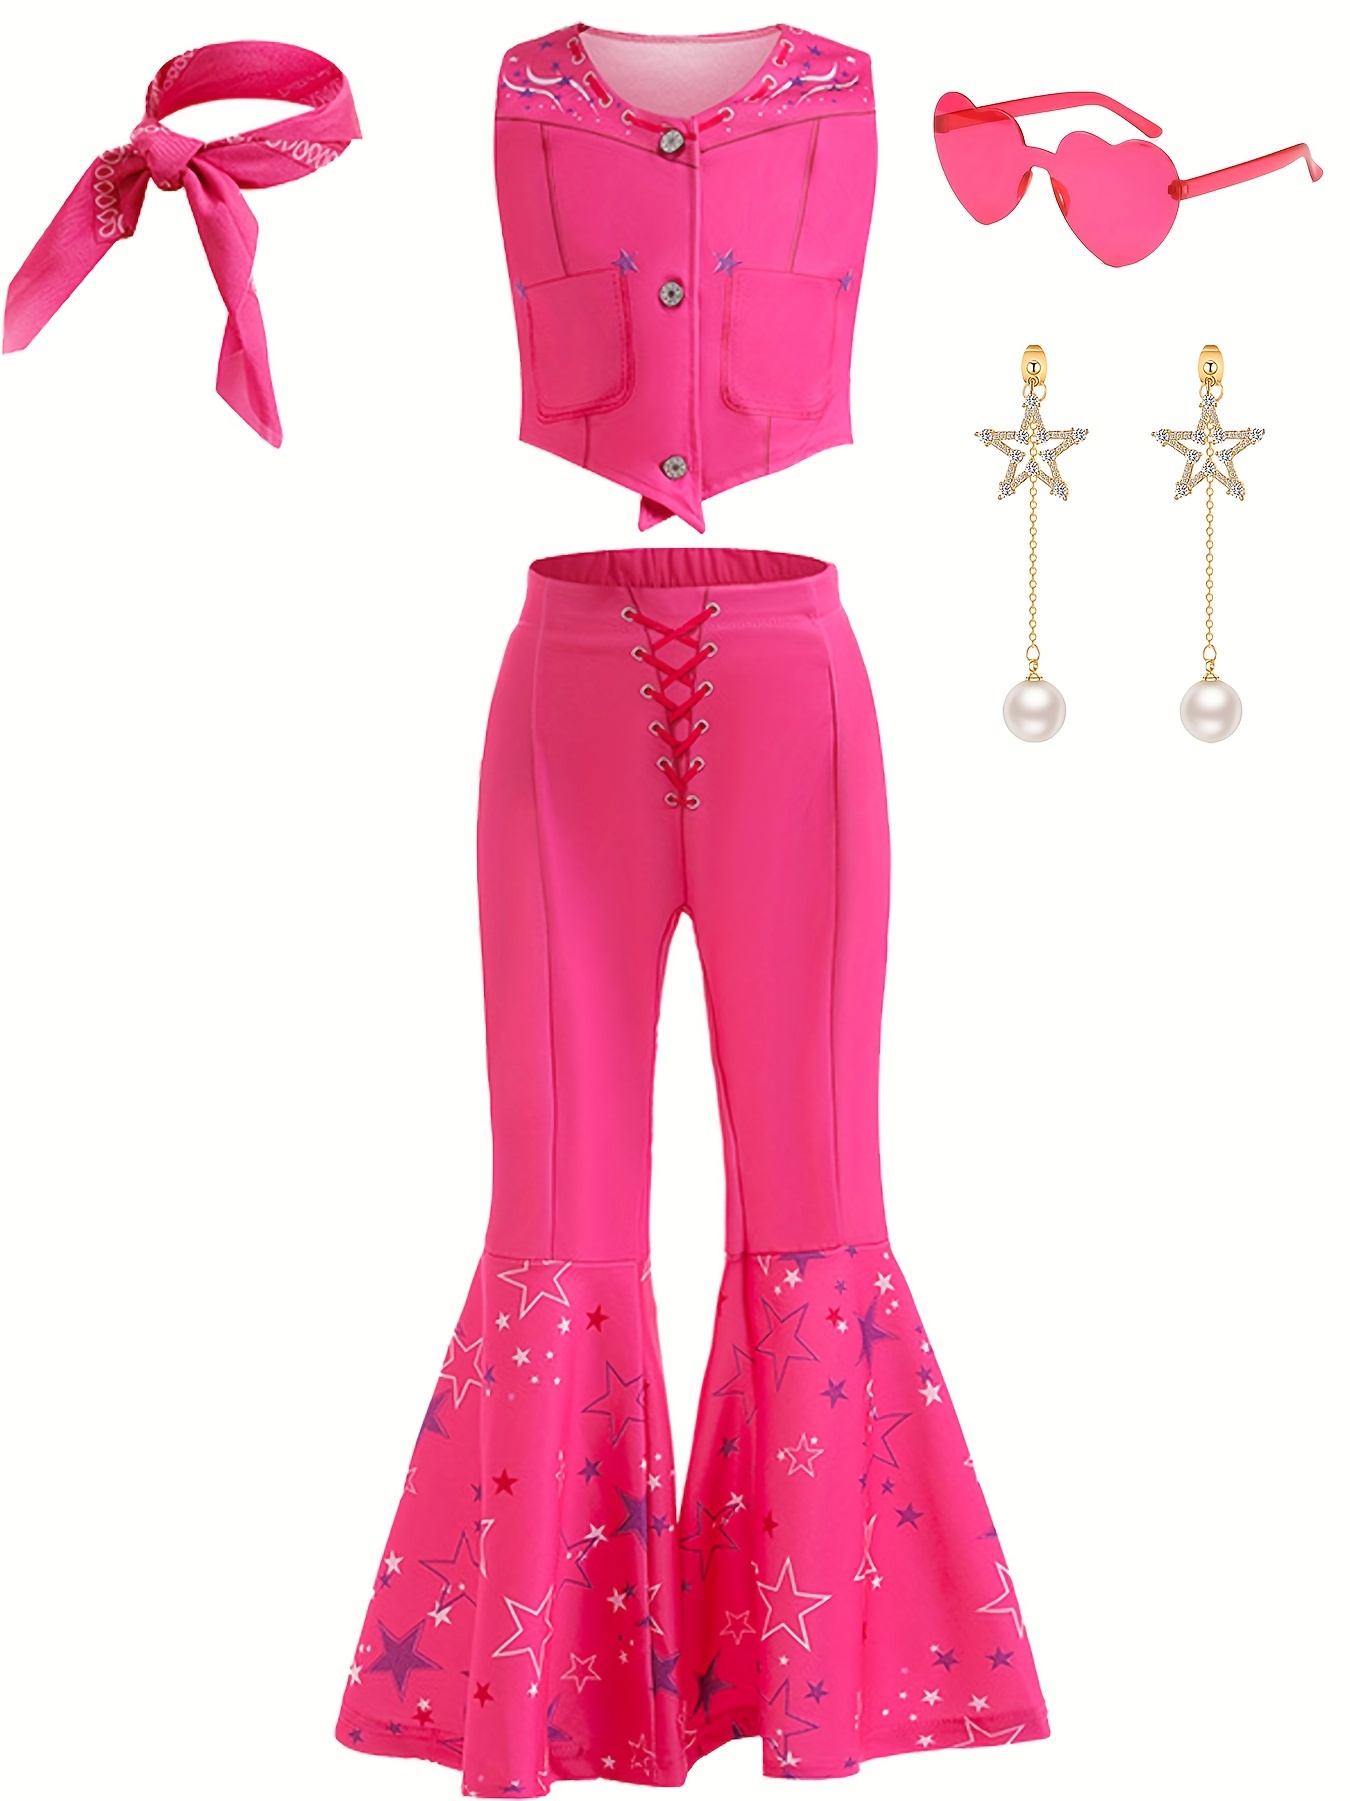 5pcs cowgirl cosplay costume set sleeveless top flare pants scarf earrings sunglasses set for christmas carnival mardi party gift